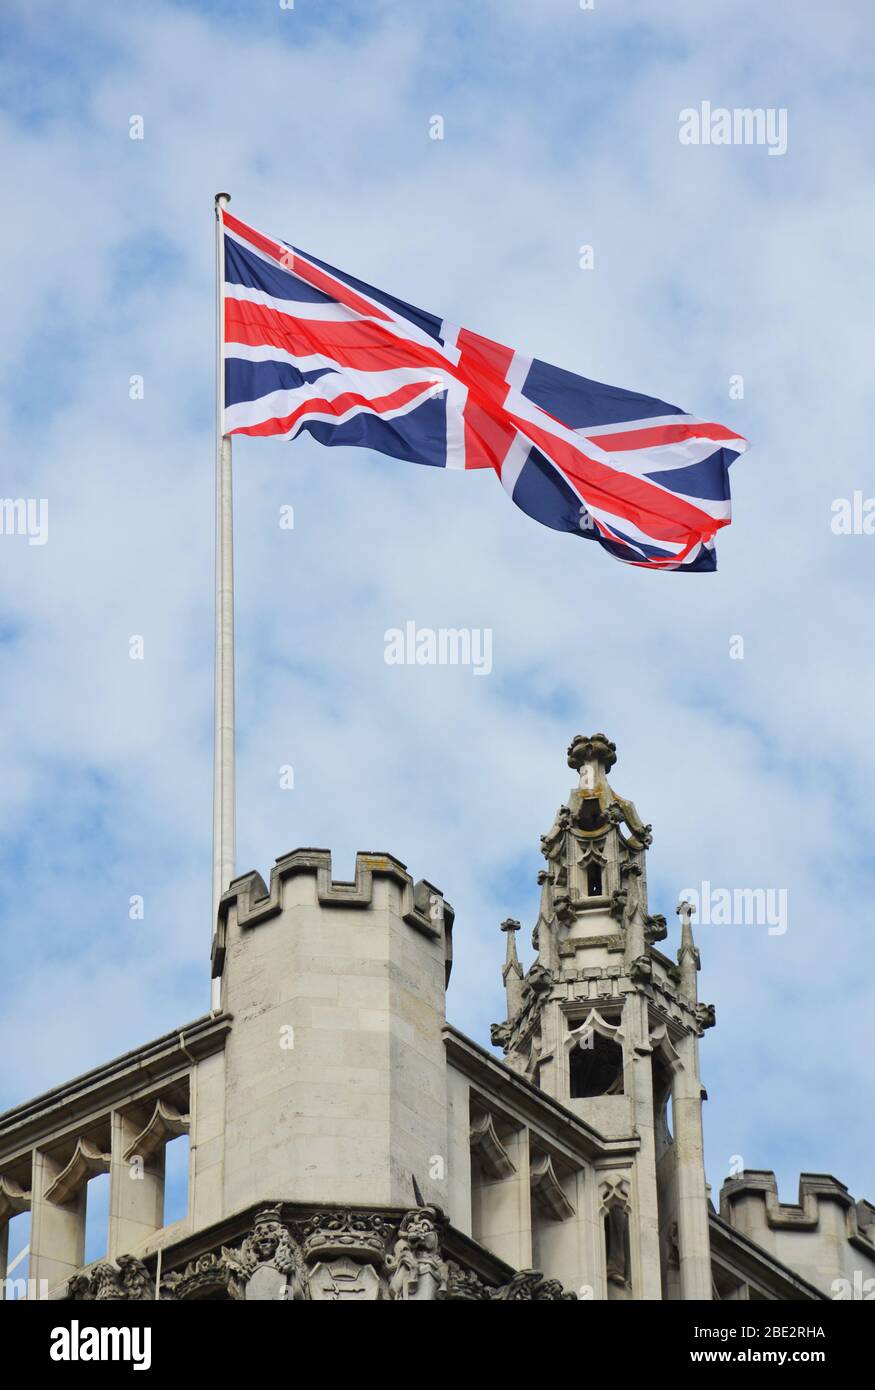 Waving flag for Great Britain Stock Photo